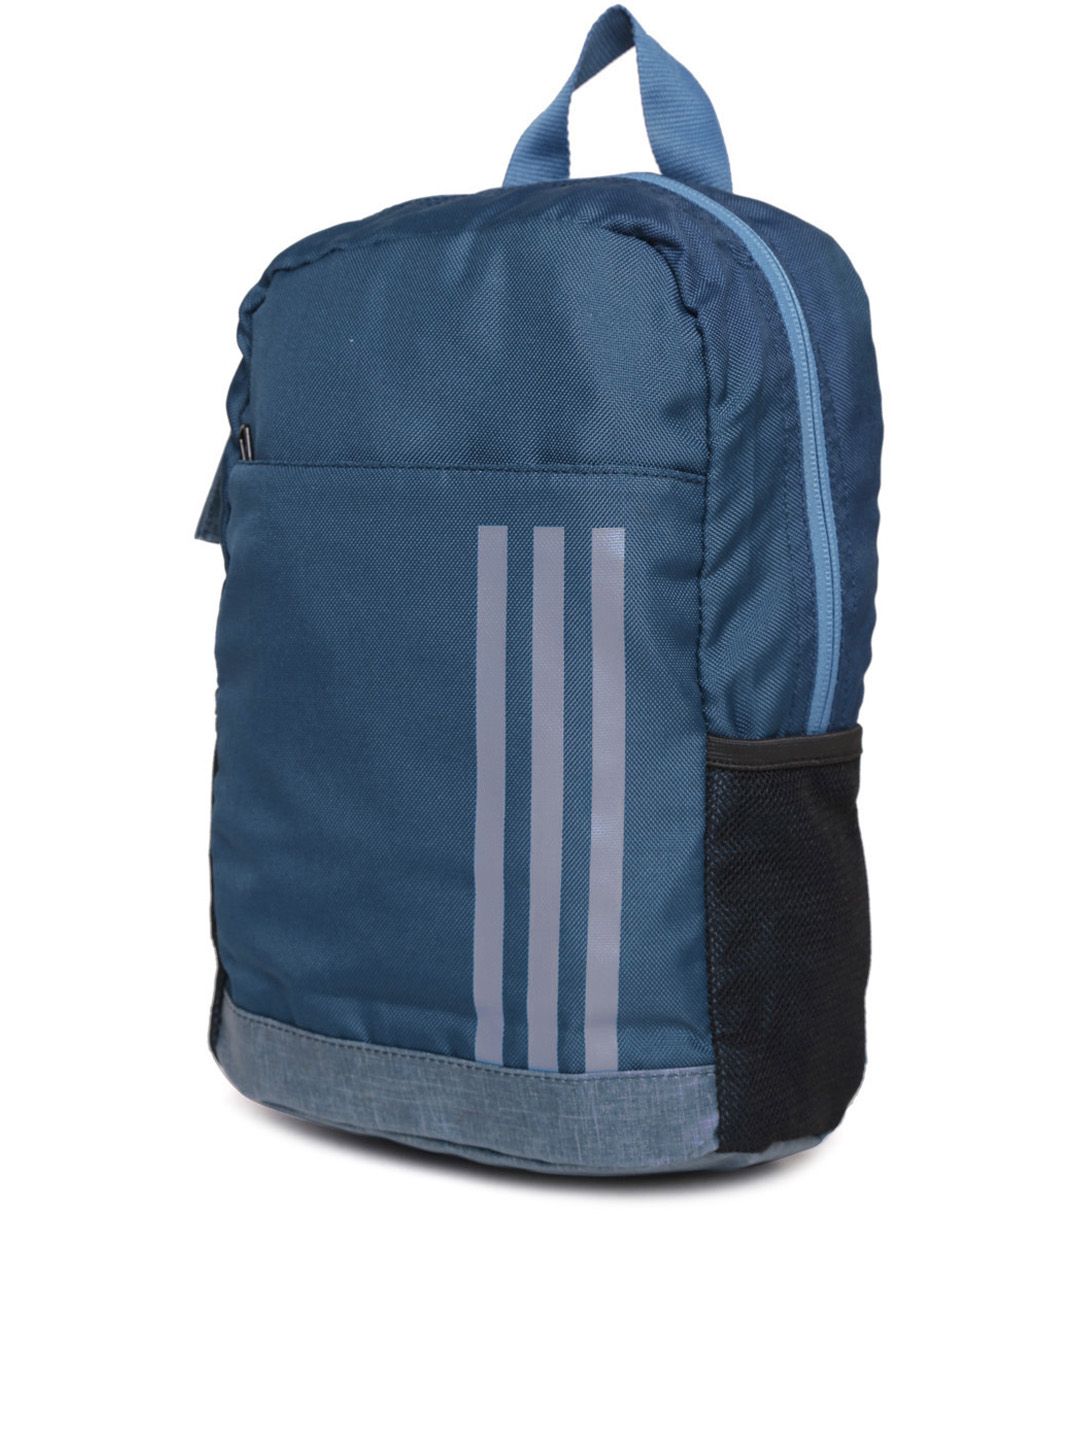 adidas backpacks for boys, Up to 50% Off adidas Shoes & Apparel Sale ...